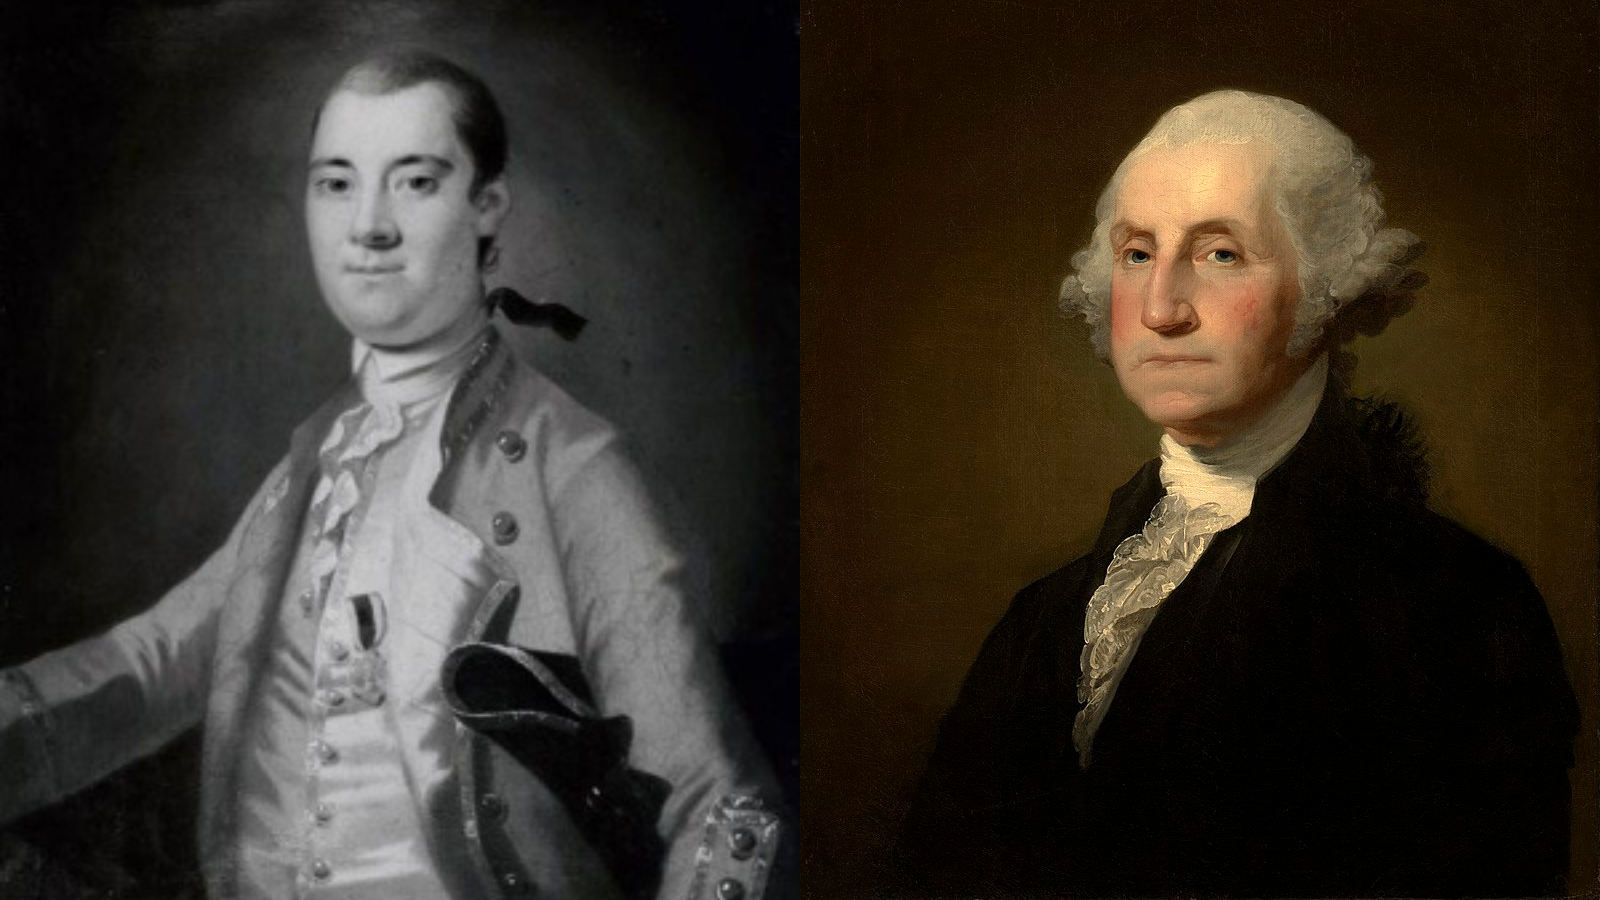 Portraits of William Tryon and George Washington